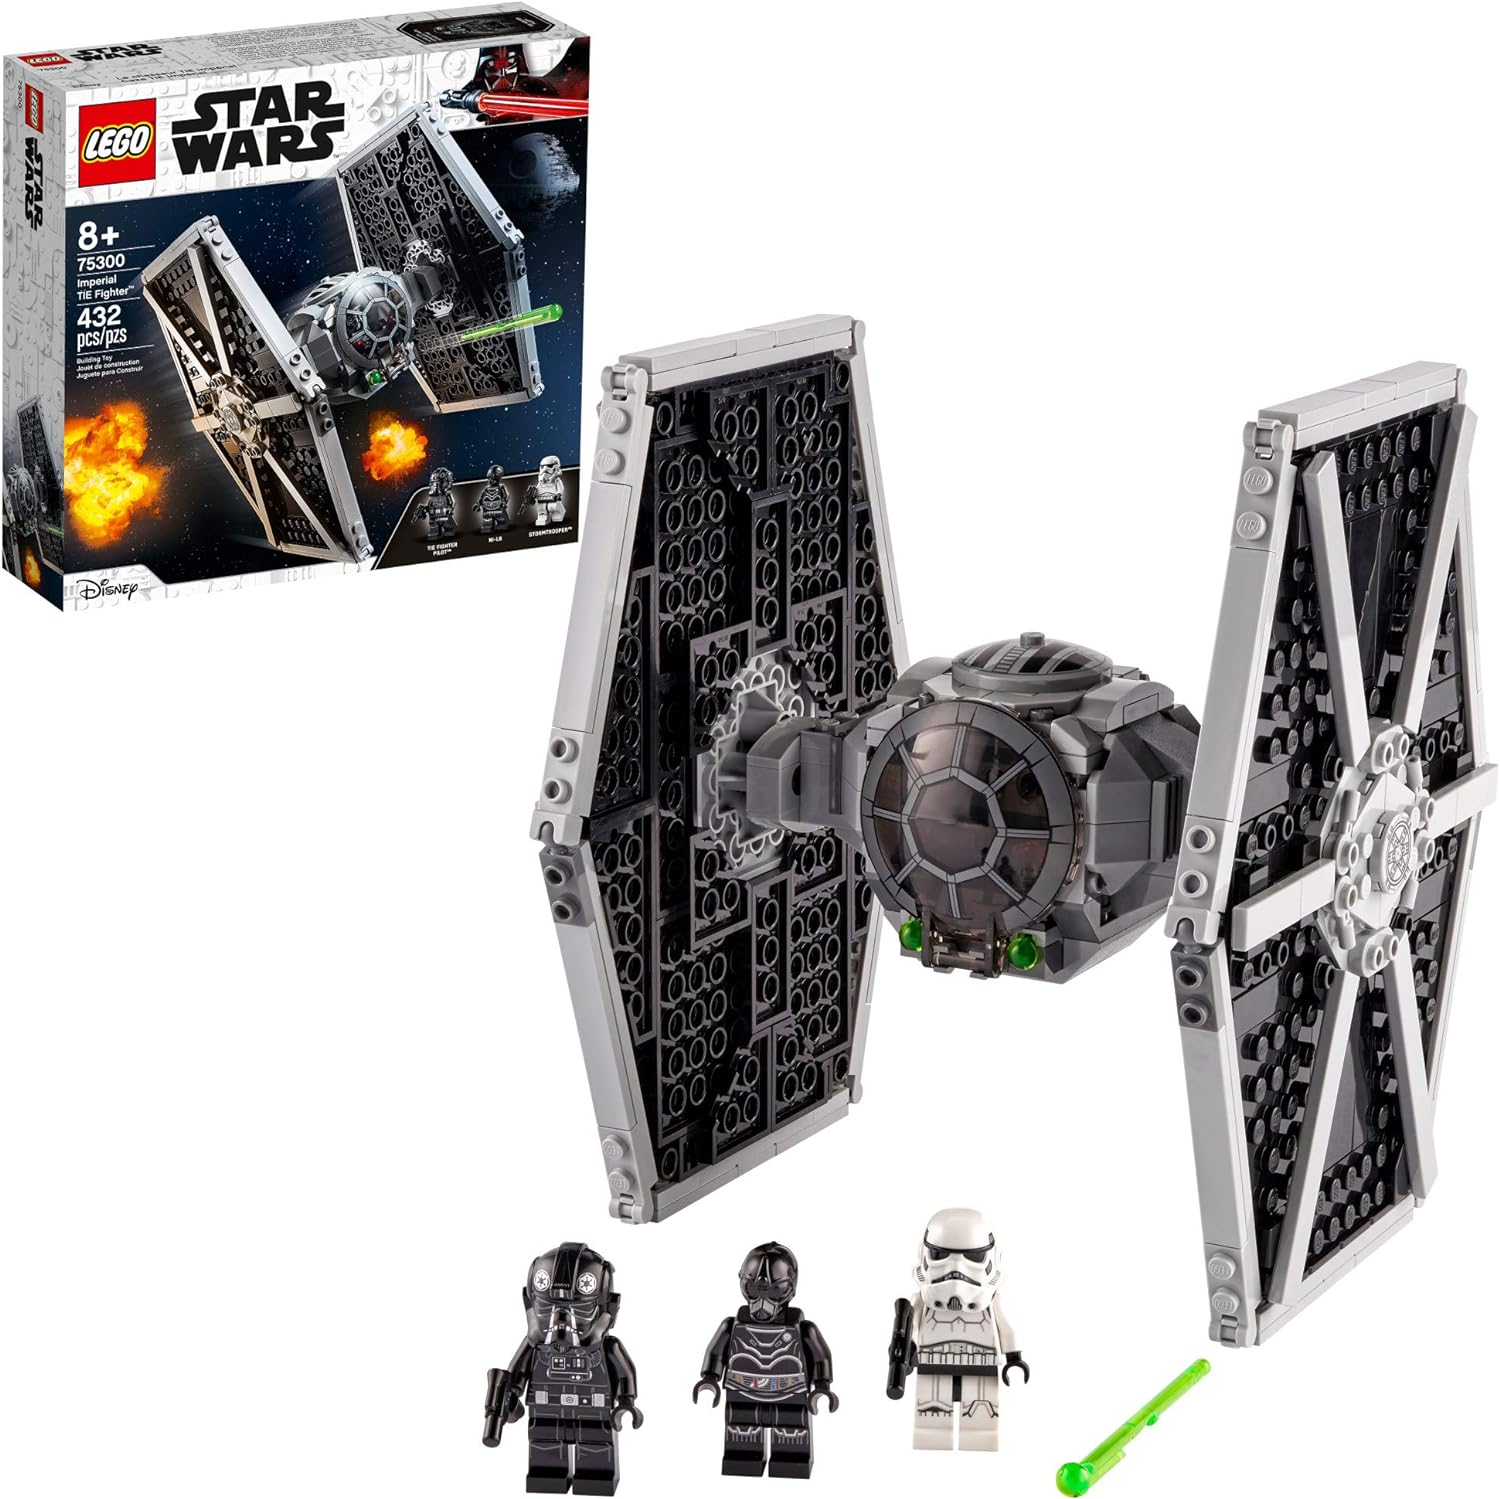 432-Piece LEGO Star Wars Imperial TIE Fighter w/ Stormtrooper & Pilot Minifigures $25 + Free Shipping w/ Prime or on $35+